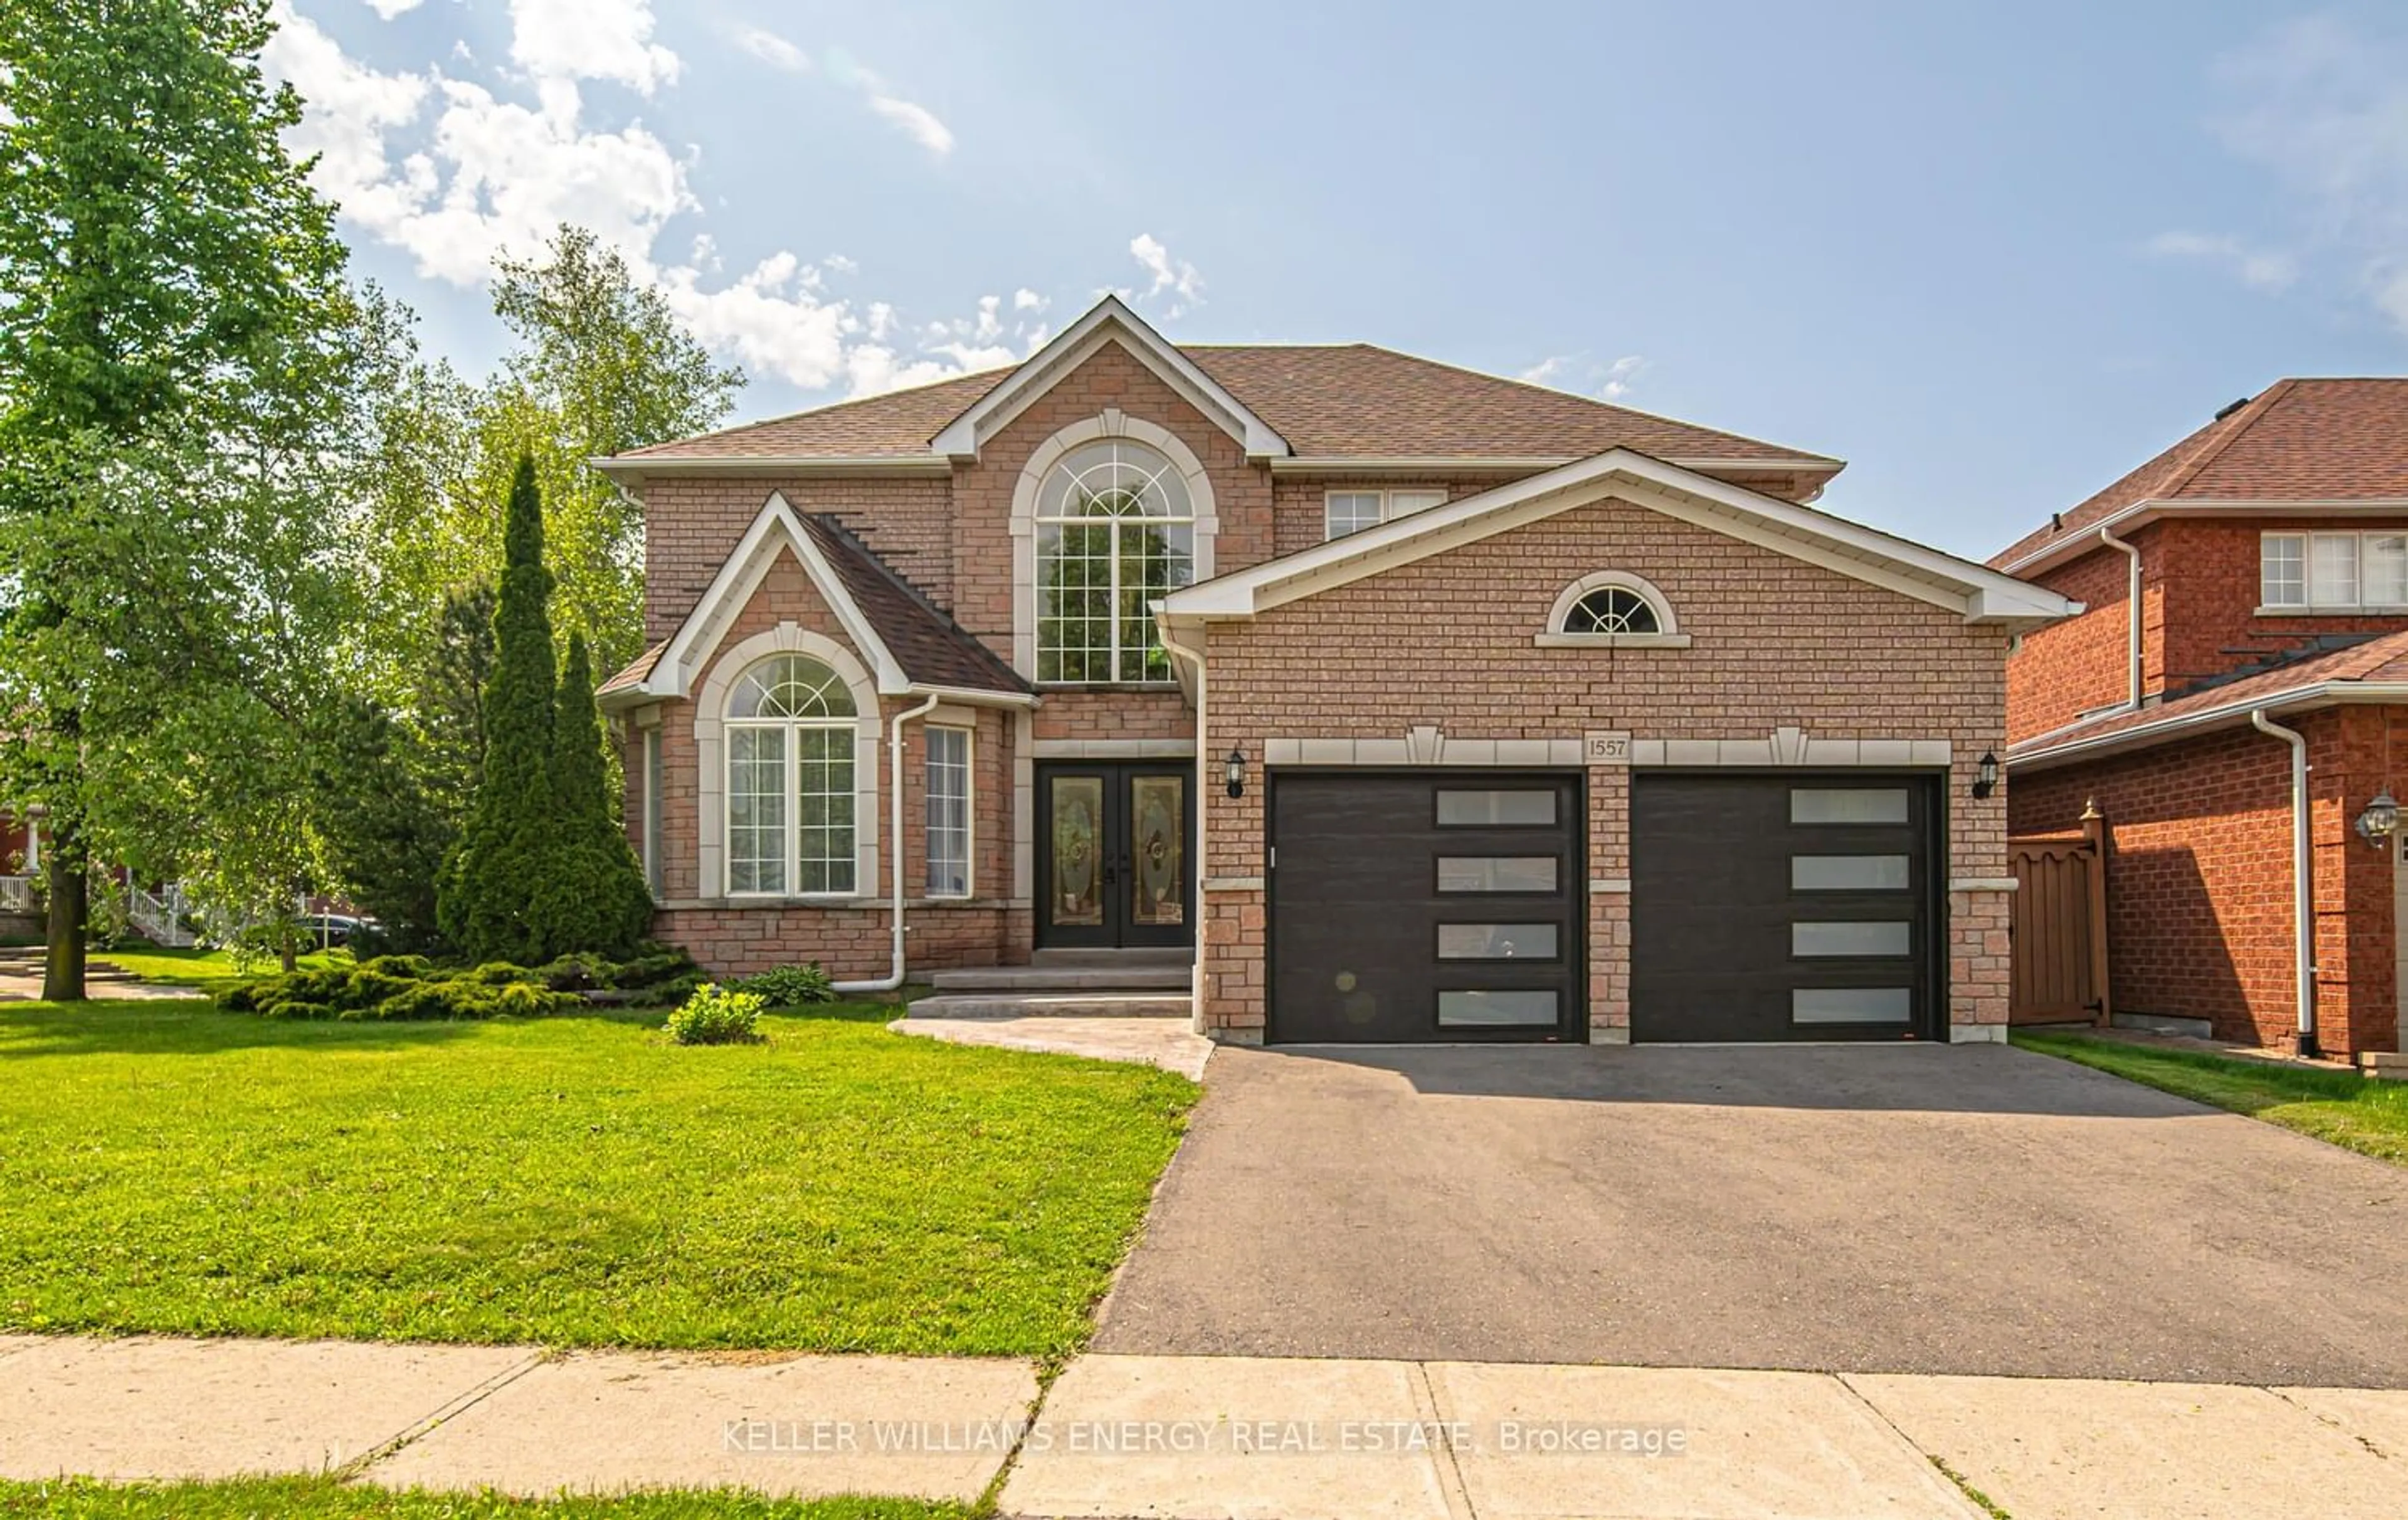 Home with brick exterior material for 1557 Greenvalley Tr, Oshawa Ontario L1K 2N6